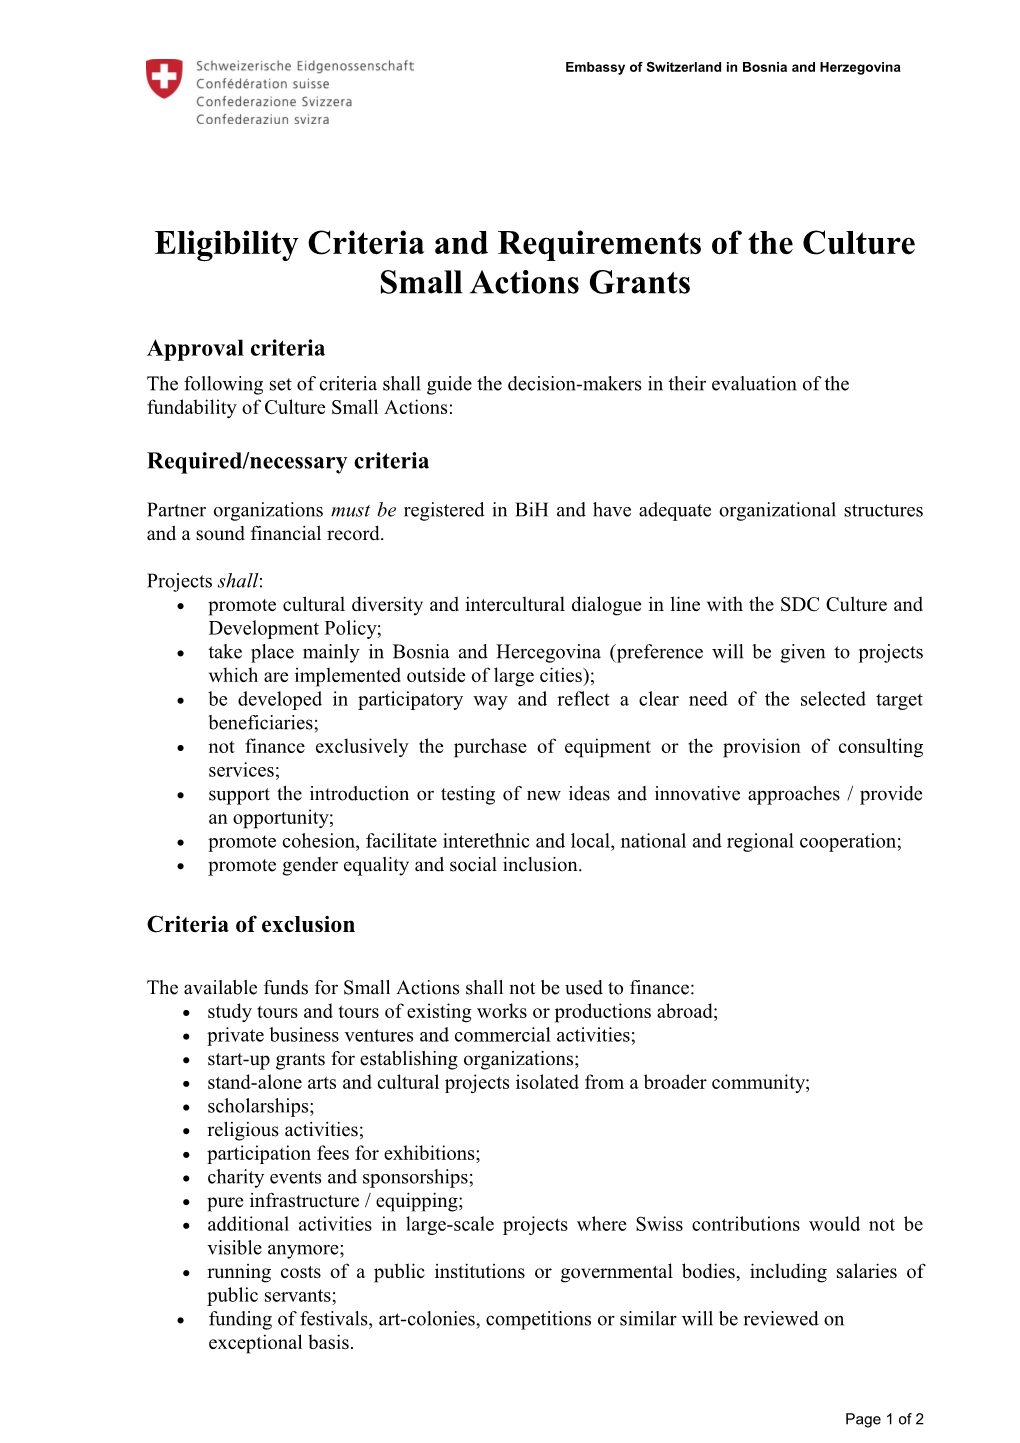 Eligibility Criteria and Requirements of the Culture Small Actions Grants